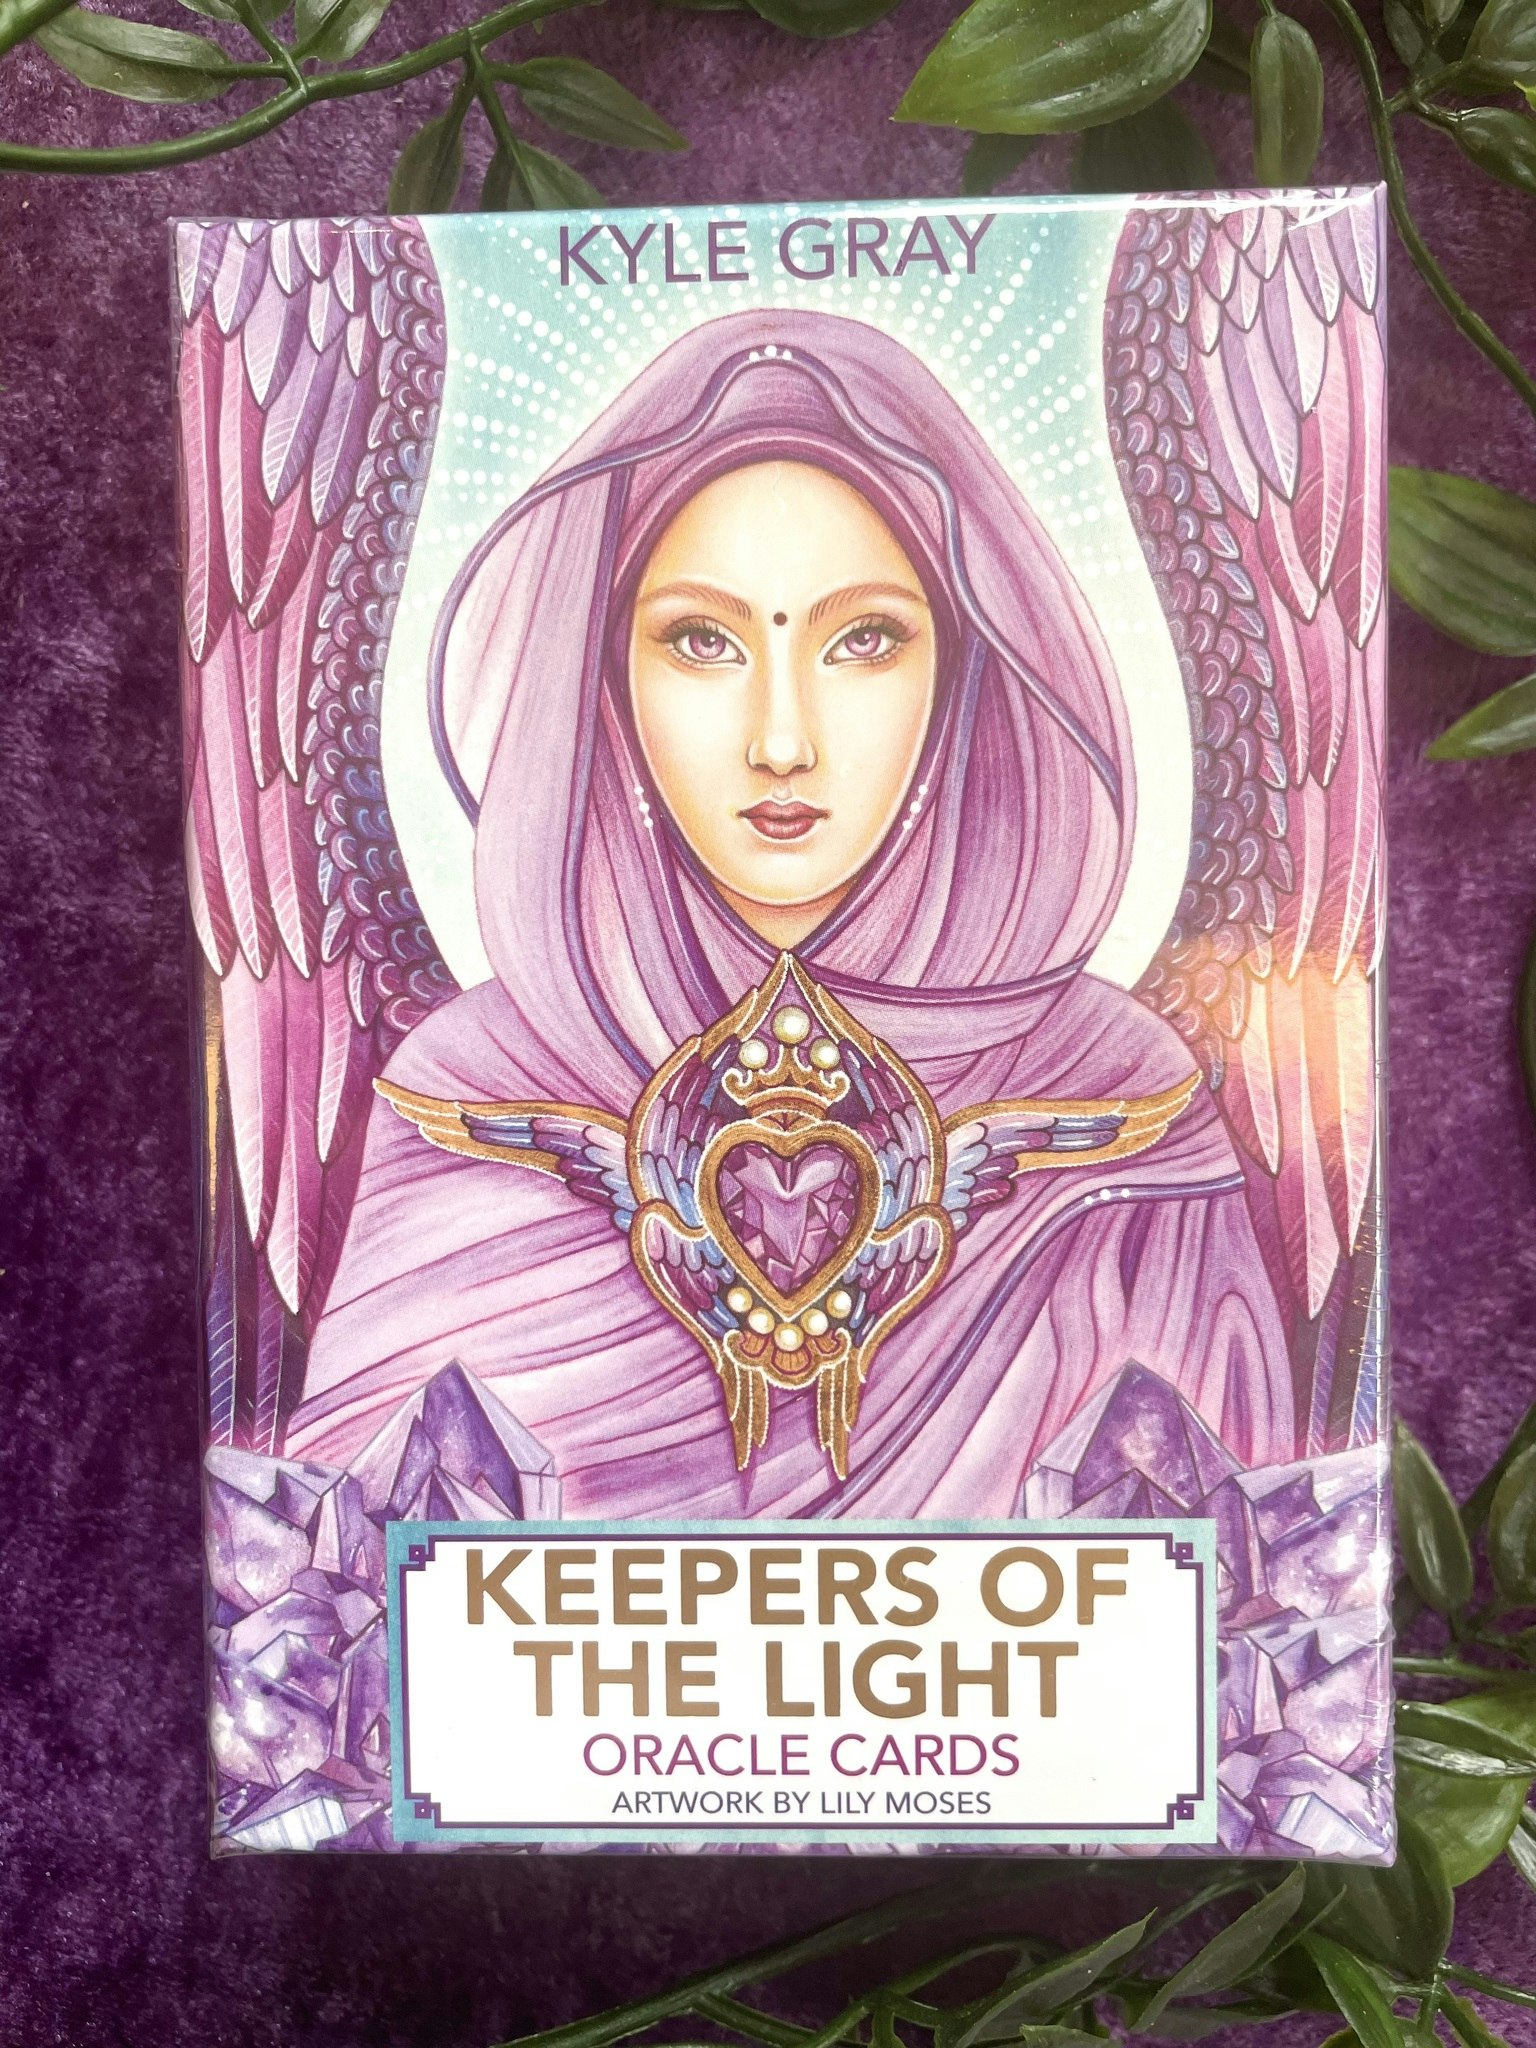 Keepers of the light